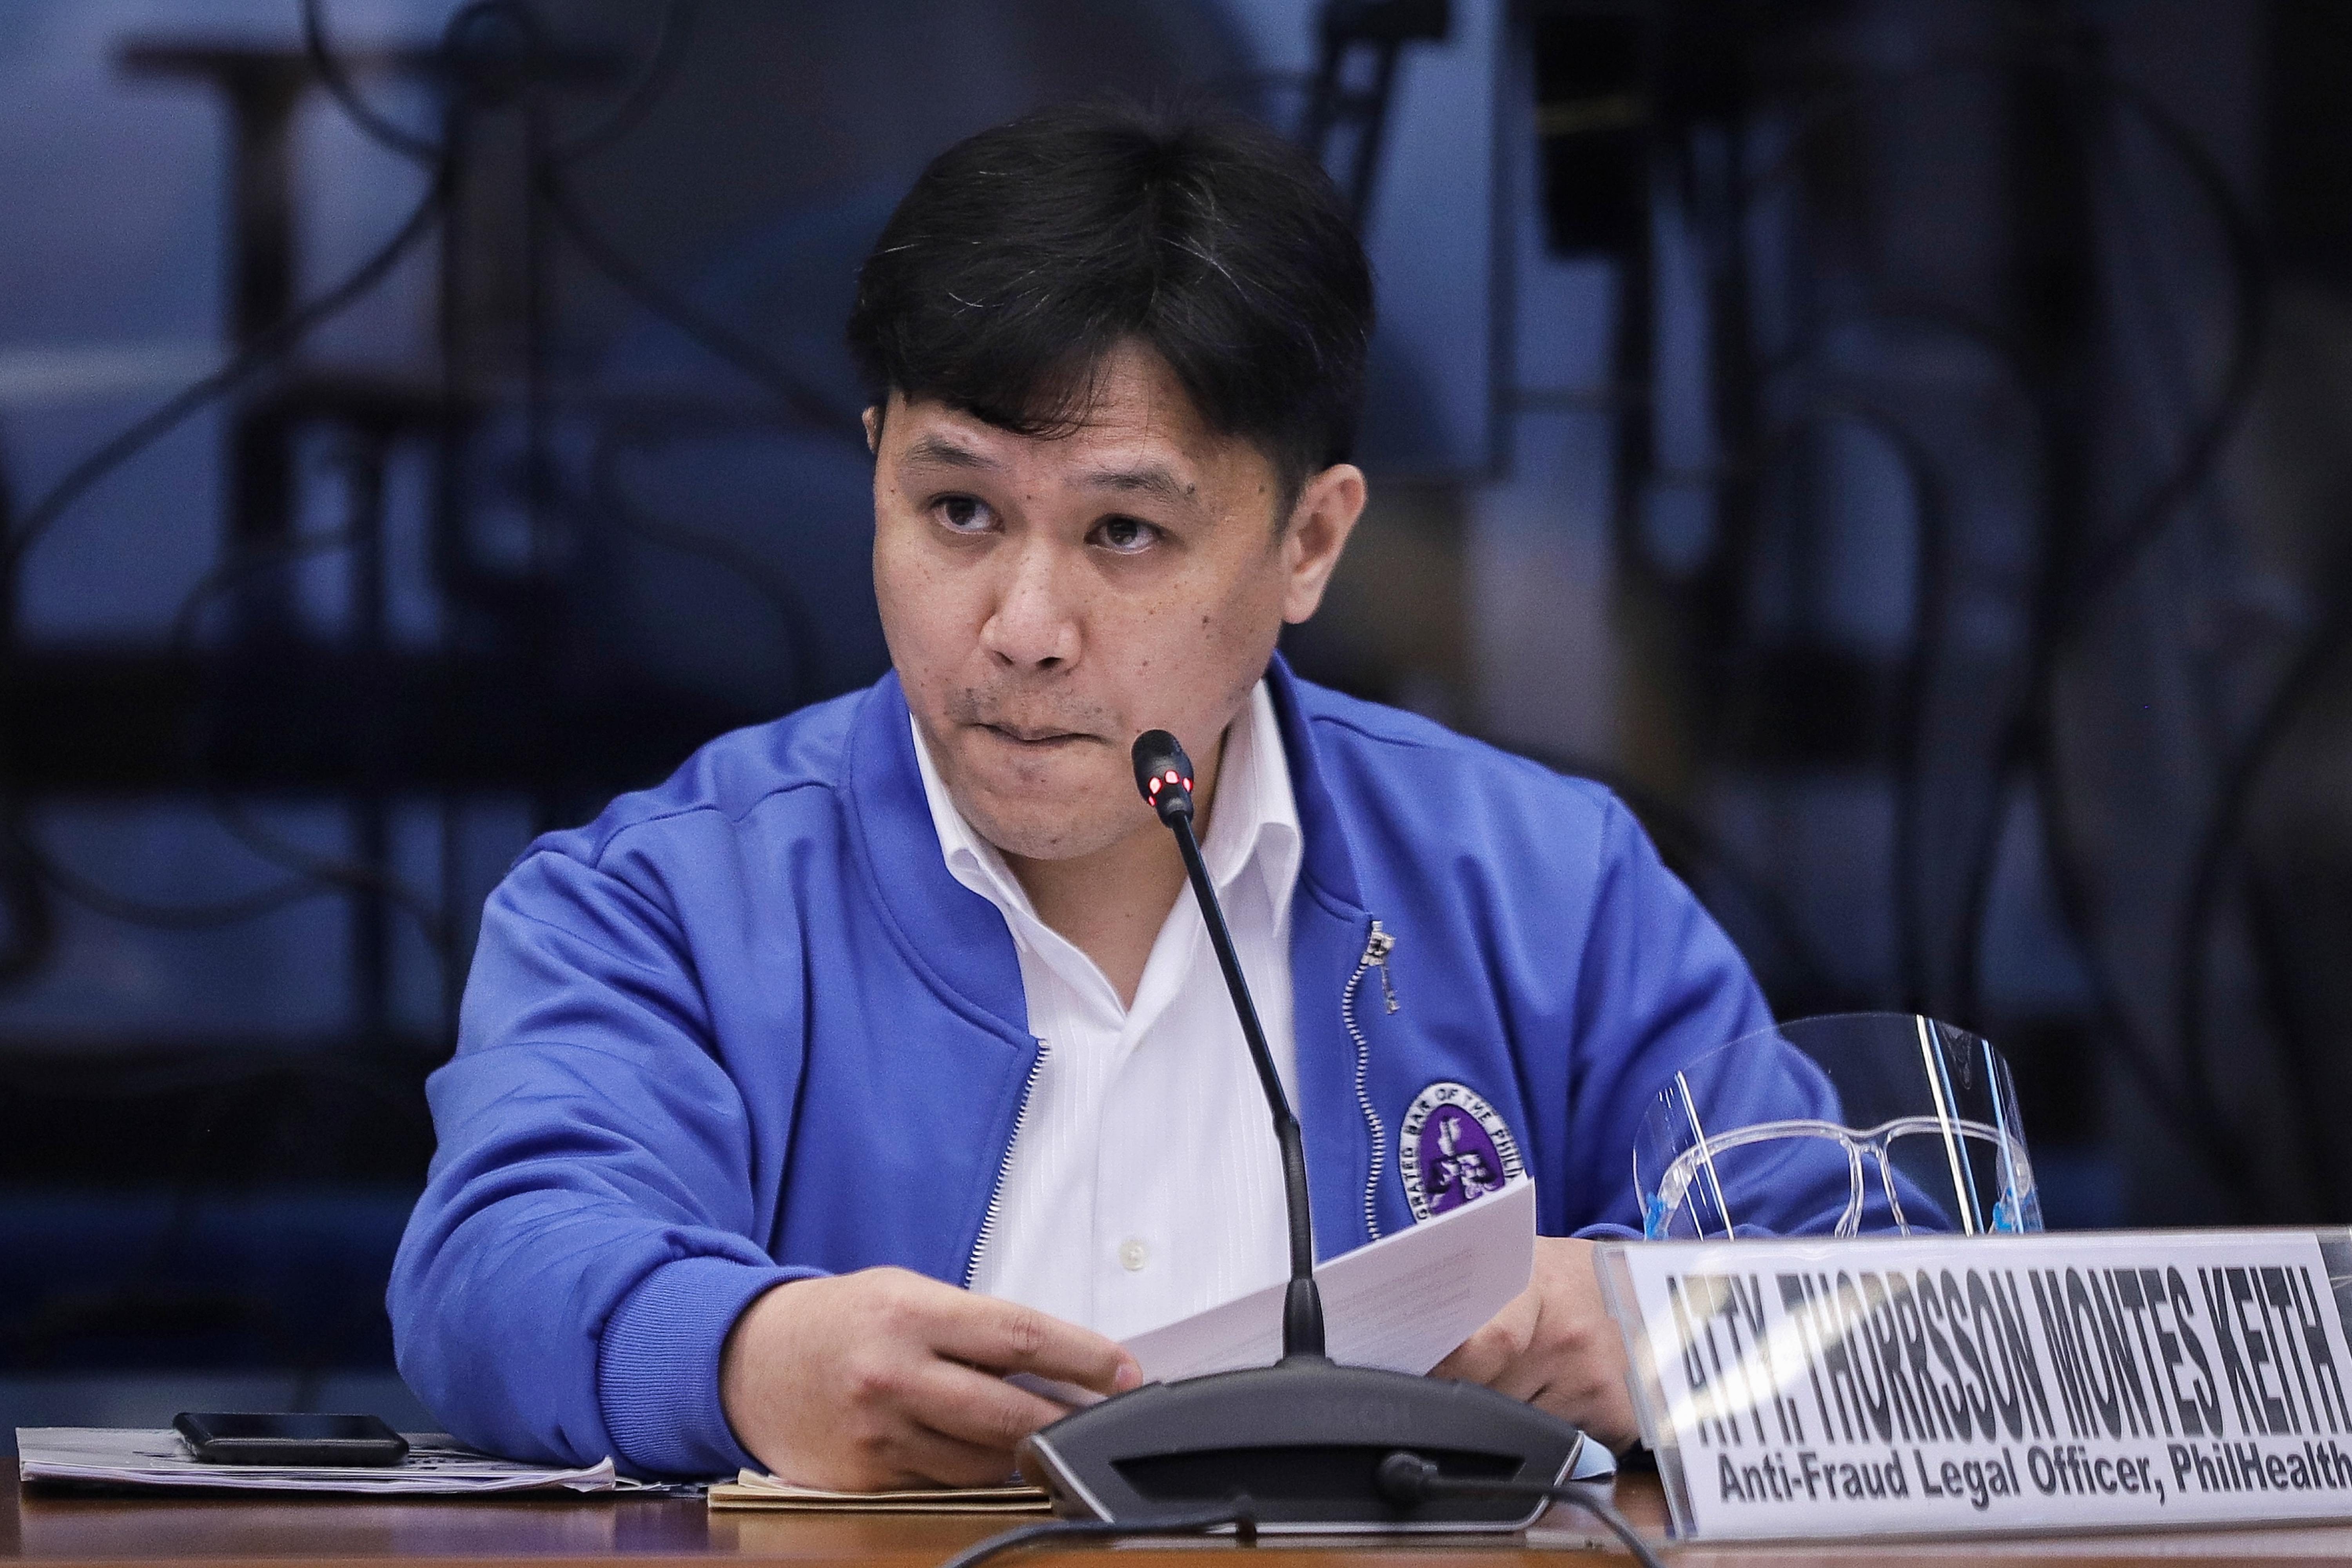 Resigned anti-fraud officer tags Duque as ‘godfather’ of PhilHealth mafia